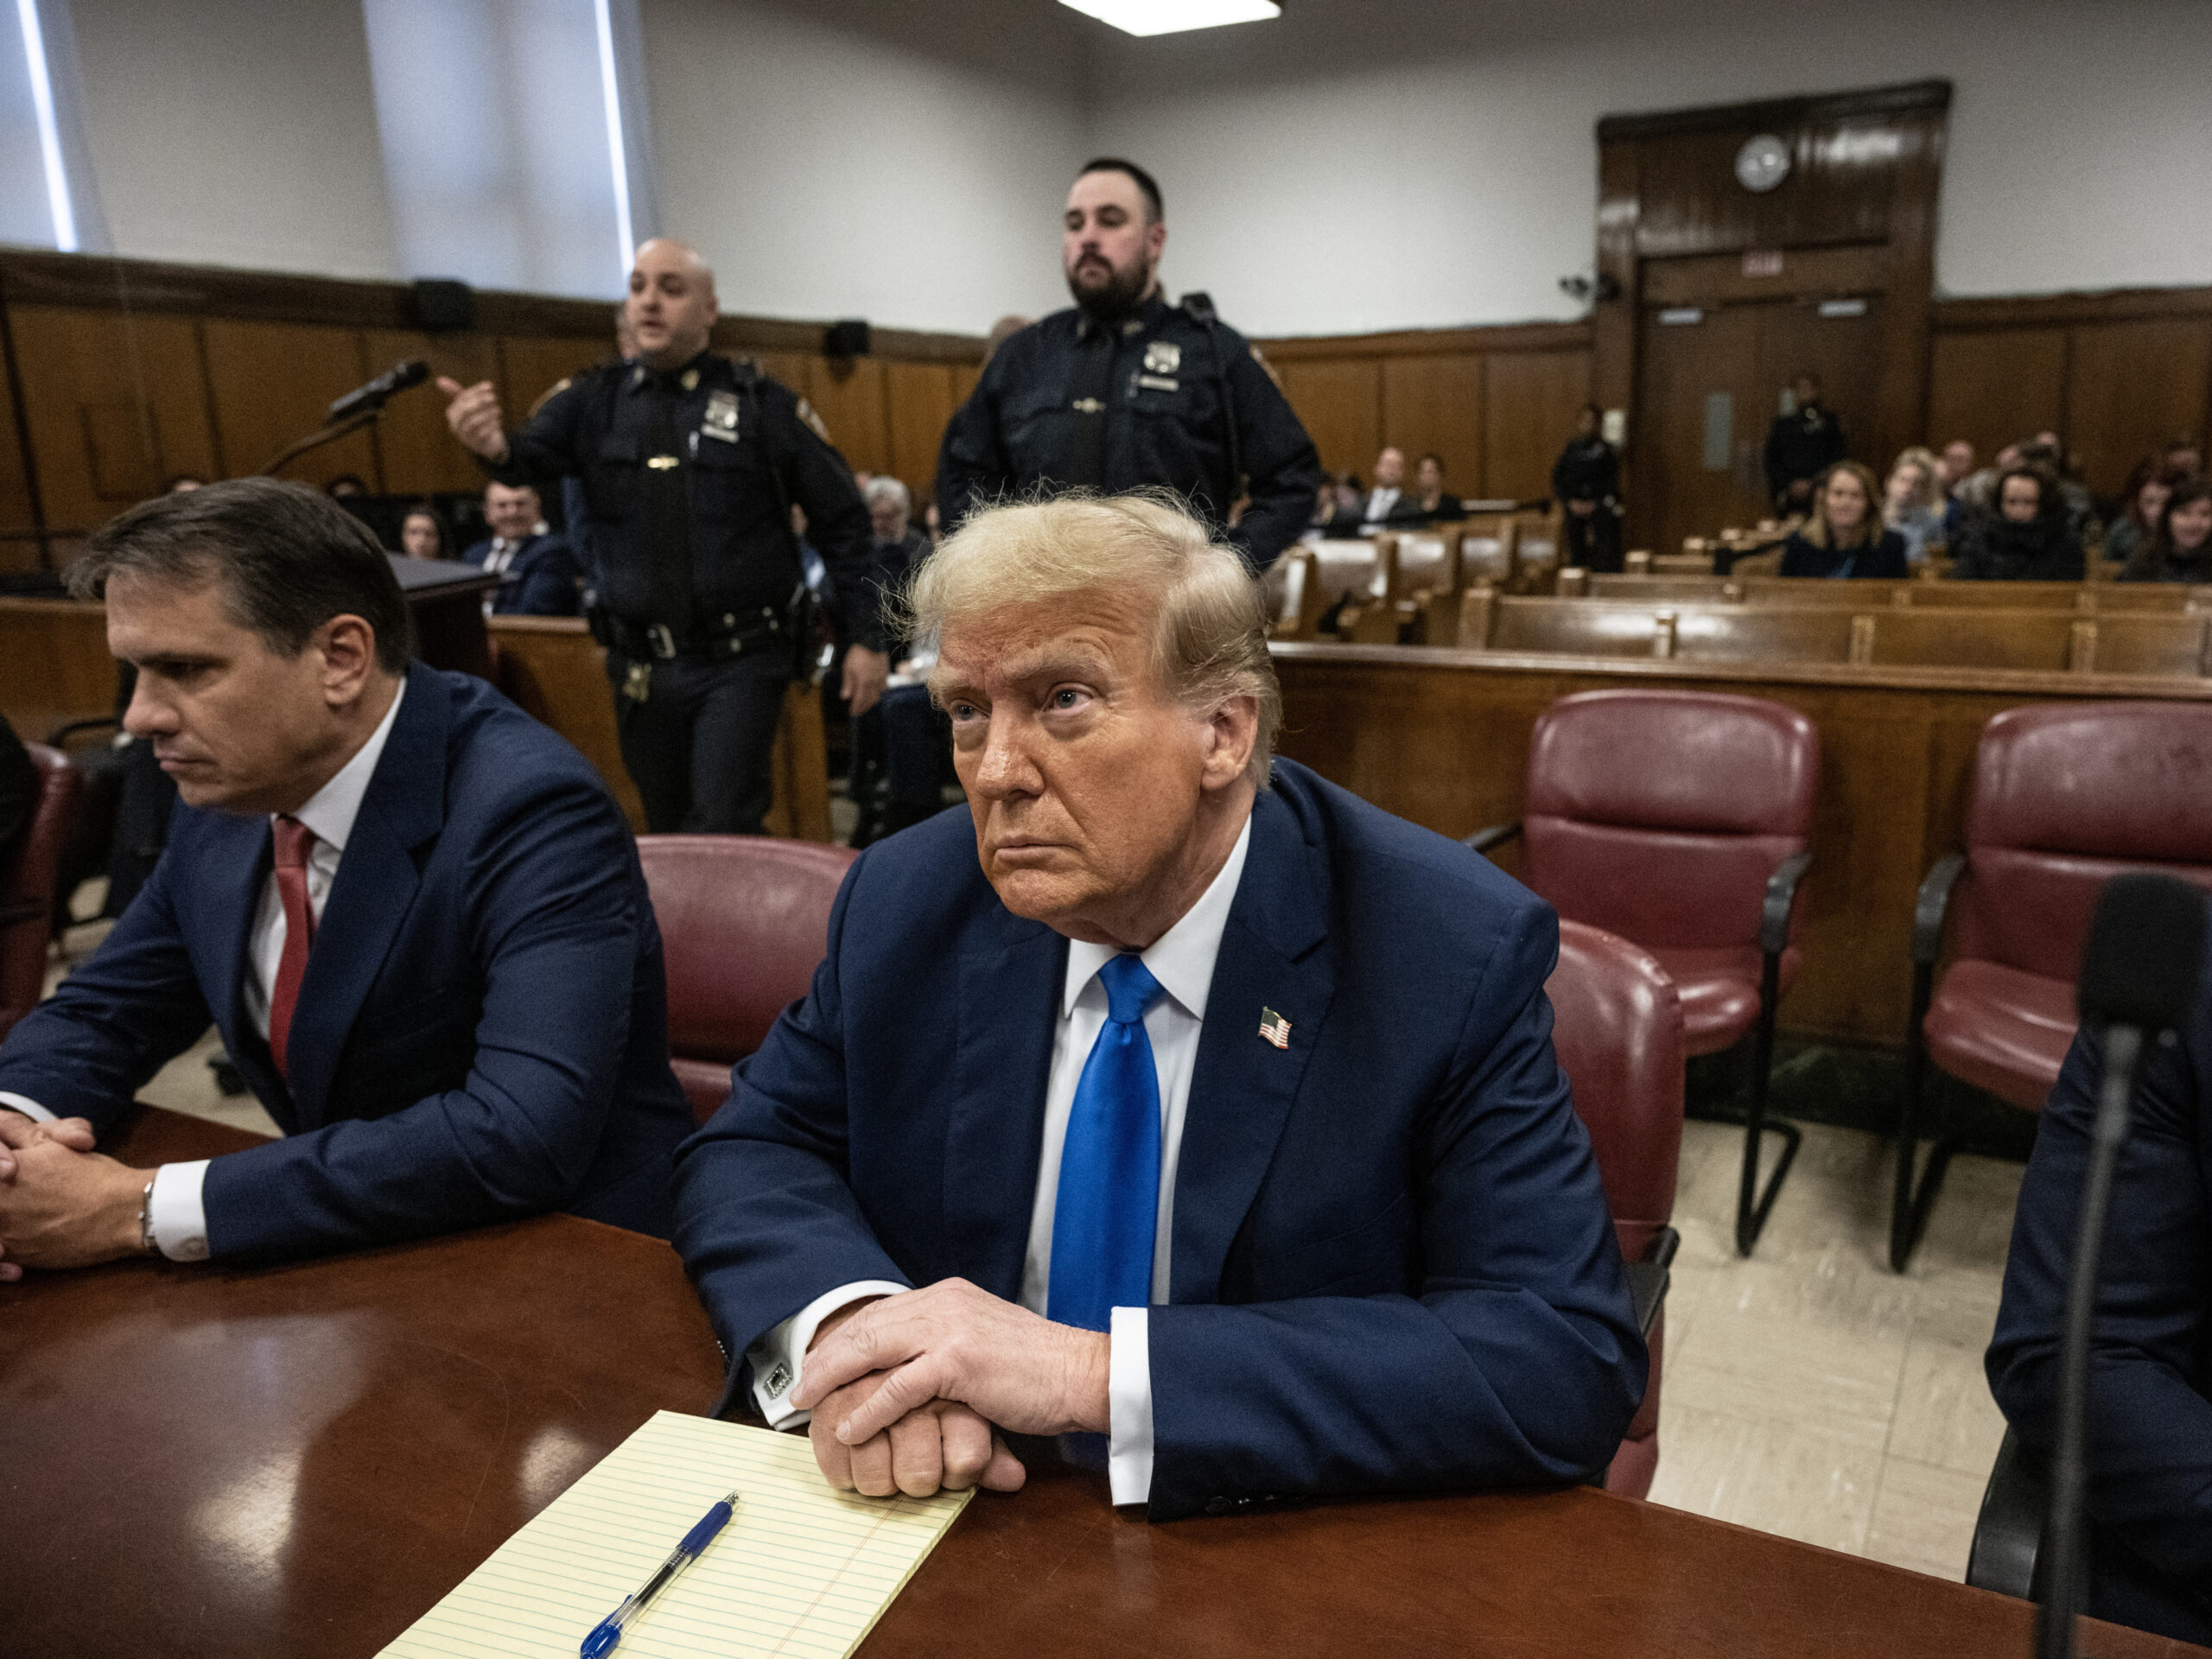 Former president and Republican presidential candidate Donald Trump looks on at Manhattan criminal court during his trial for allegedly covering up hush money payments linked to extramarital affairs in New York on Monday.